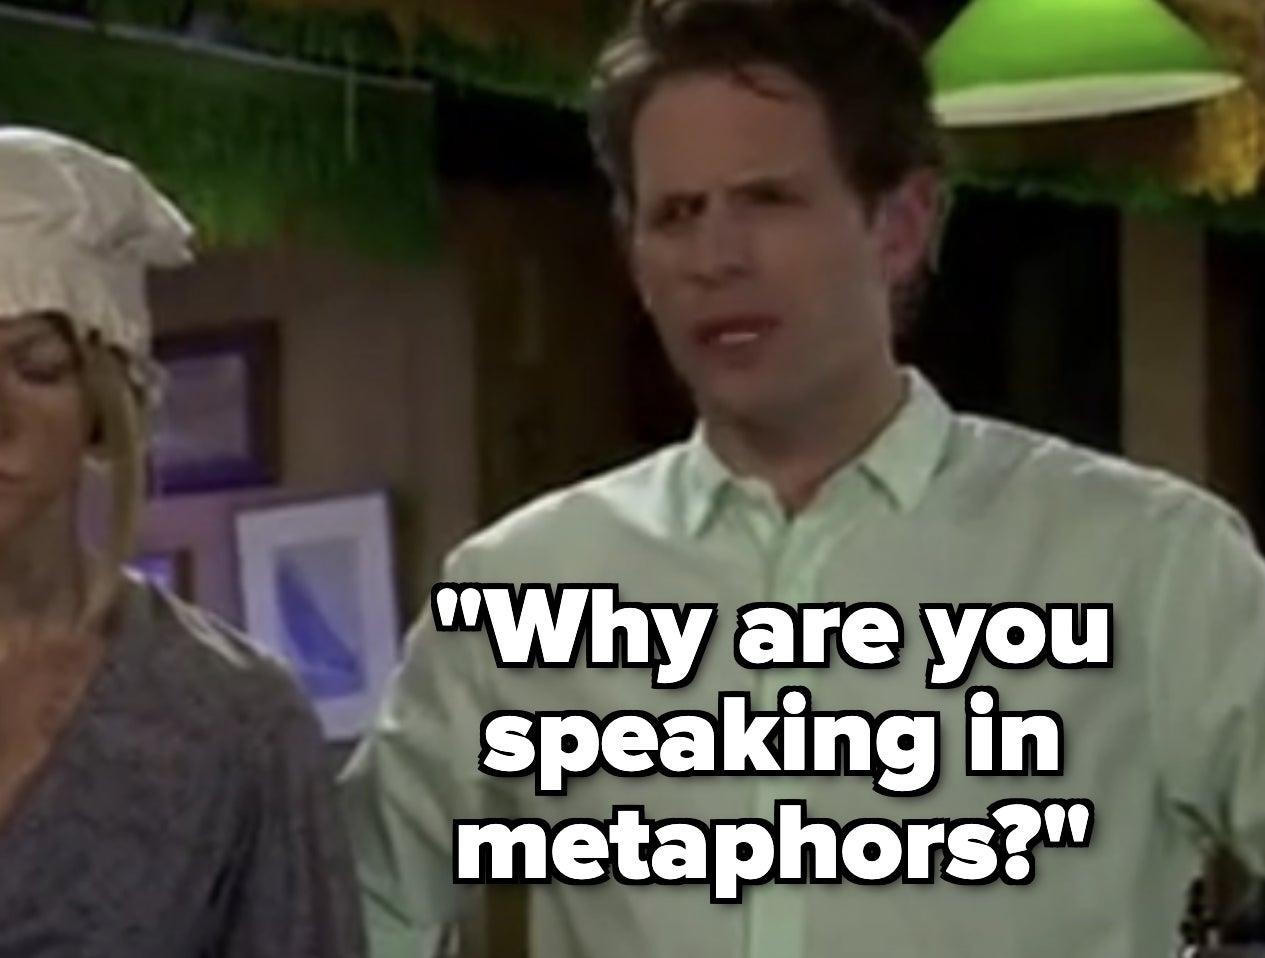 &quot;Why are you speaking in metaphors?&quot;